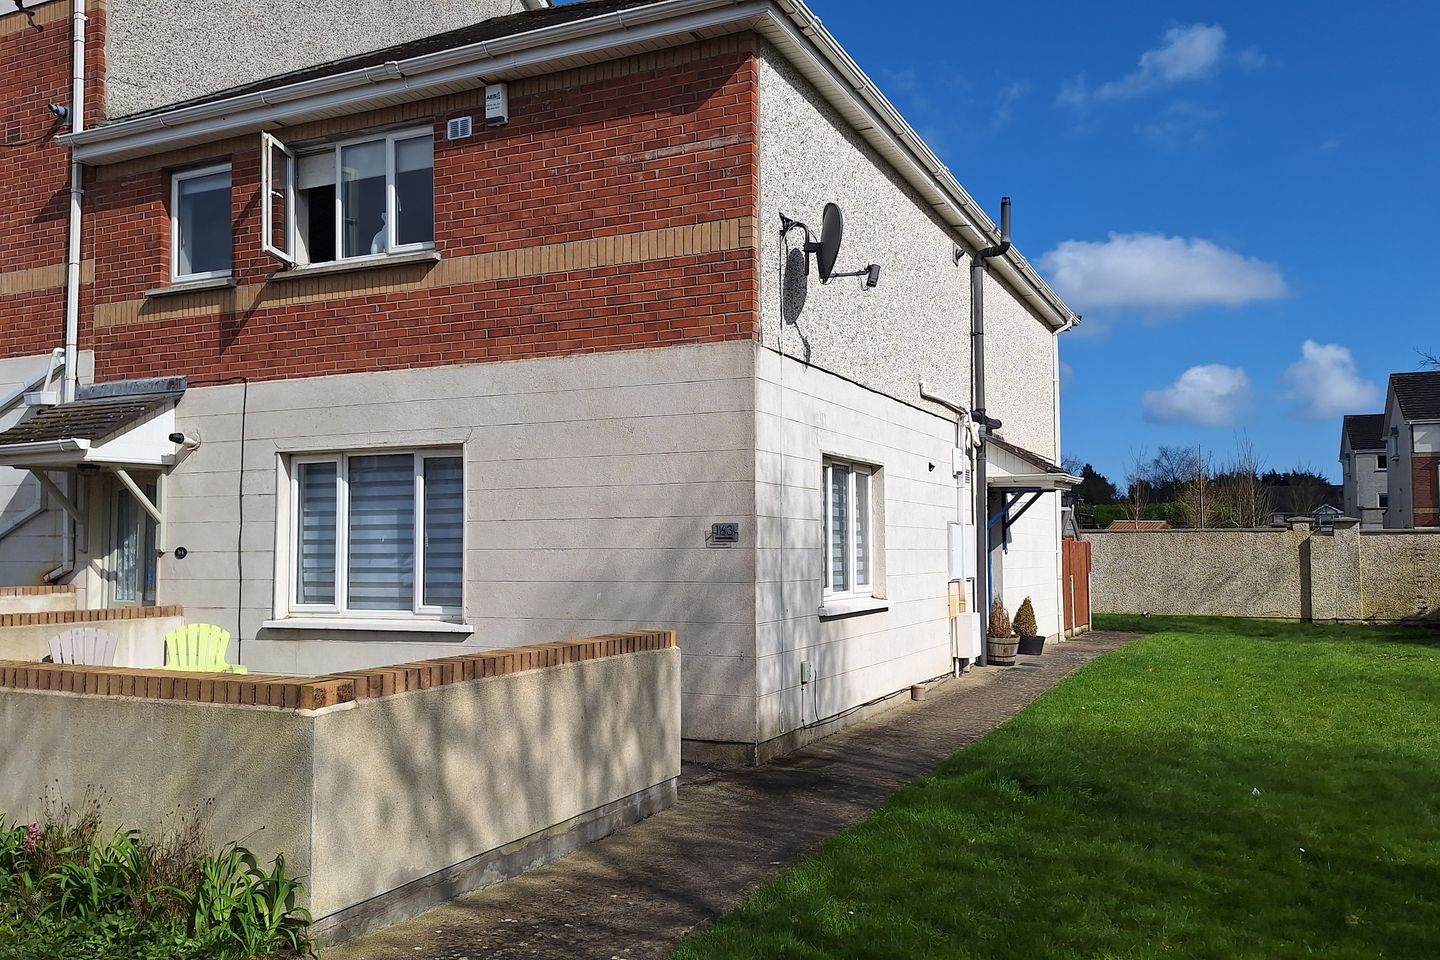 163 Bryanstown Manor, Dublin Road, Drogheda, Co. Louth, A92PP58